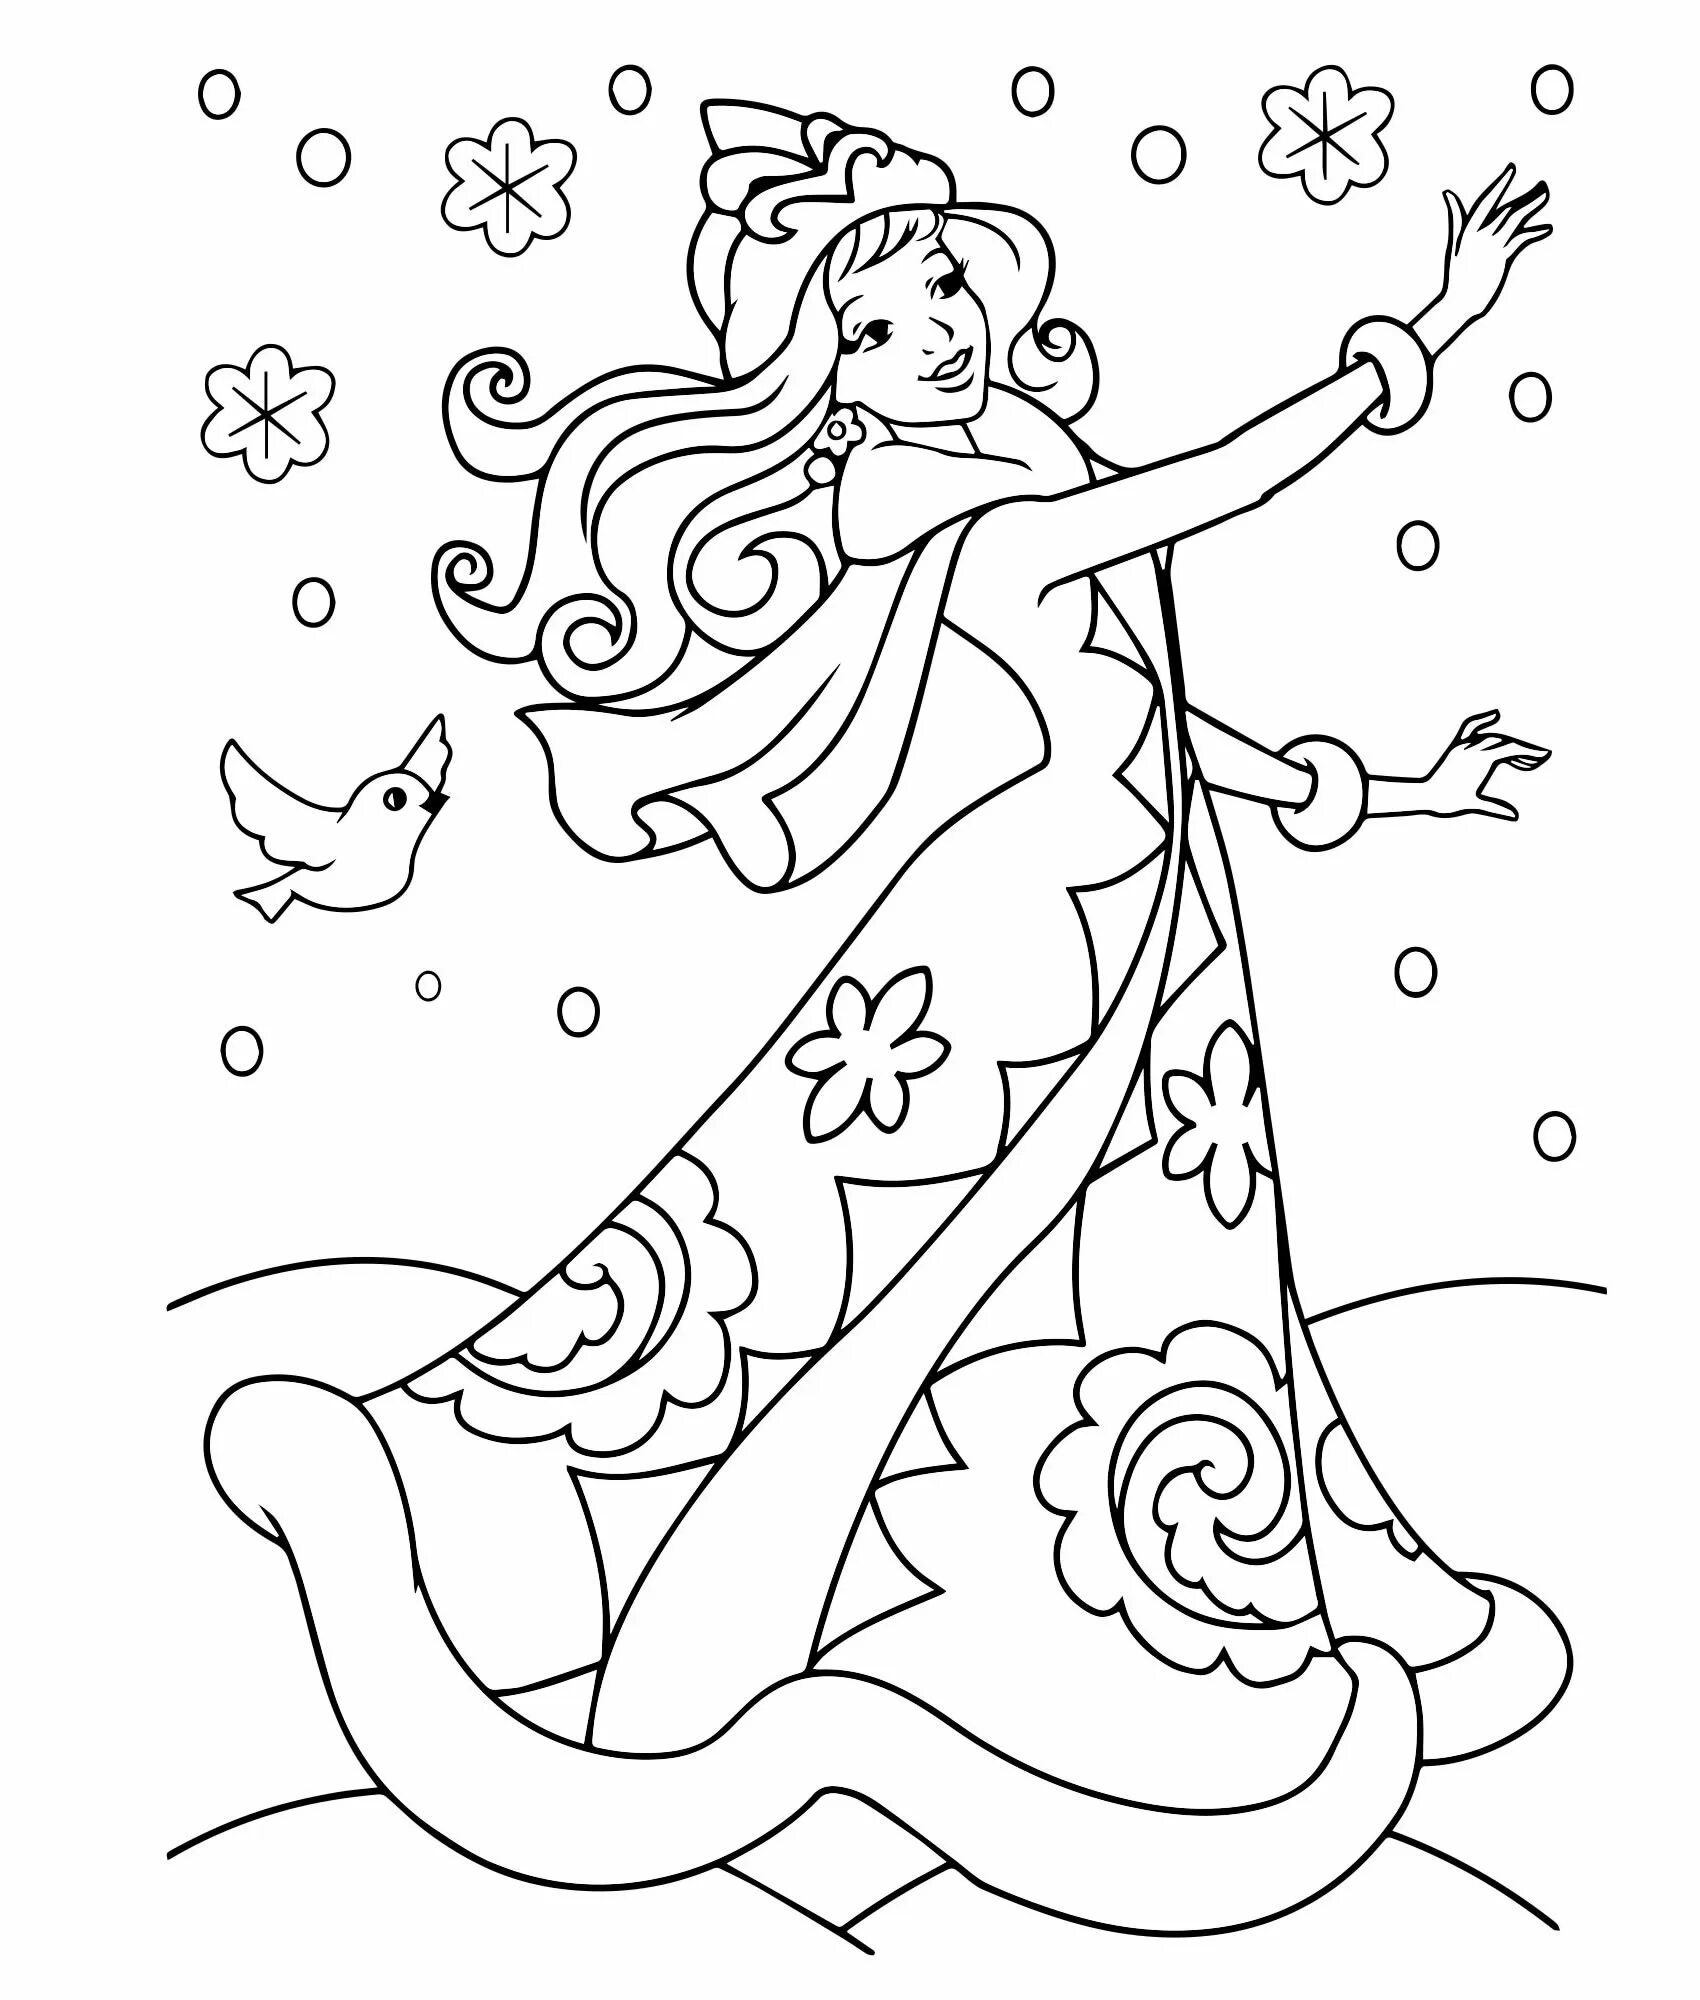 Mystical Christmas coloring book for girls